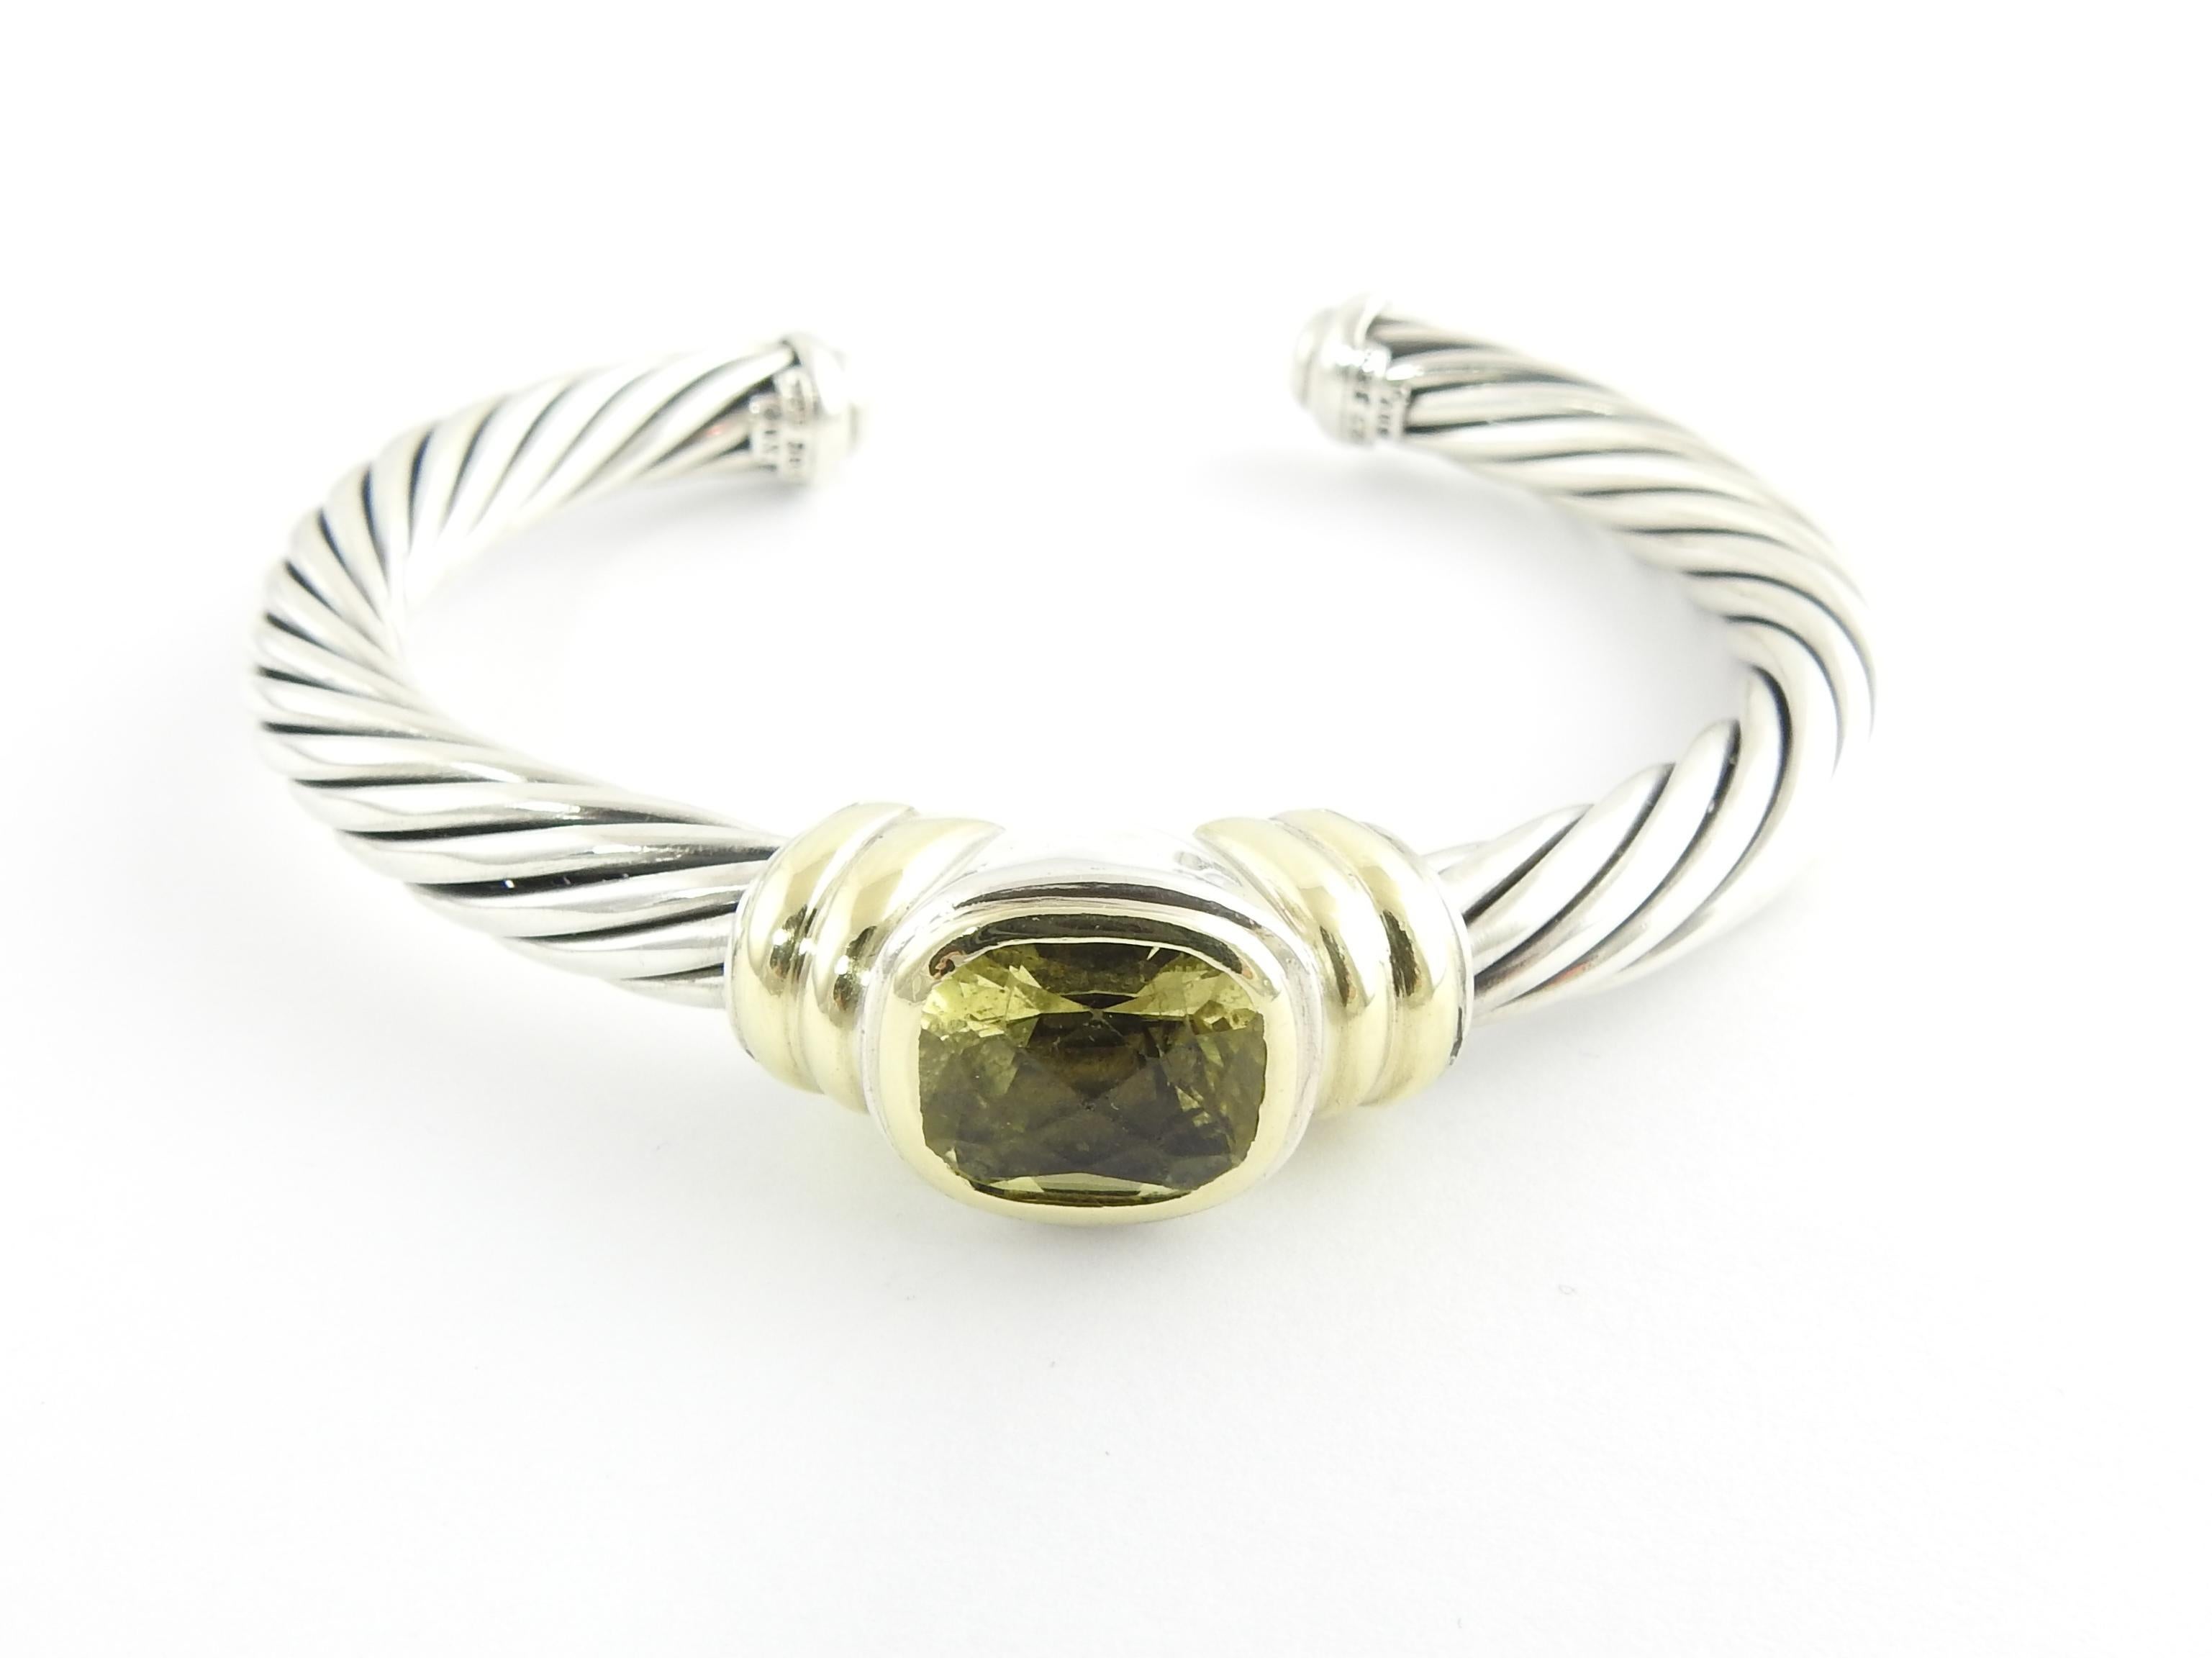 David Yurman Noblesse 14K Yellow Gold Sterling Silver Lemon Citrine Bracelet

This authentic David Yurman bracelet is 7mm wide

Front of the bracelet is 14K yellow gold with a center faceted citrine stone. Stone is approx. 11mm x 9mm

Gold in the